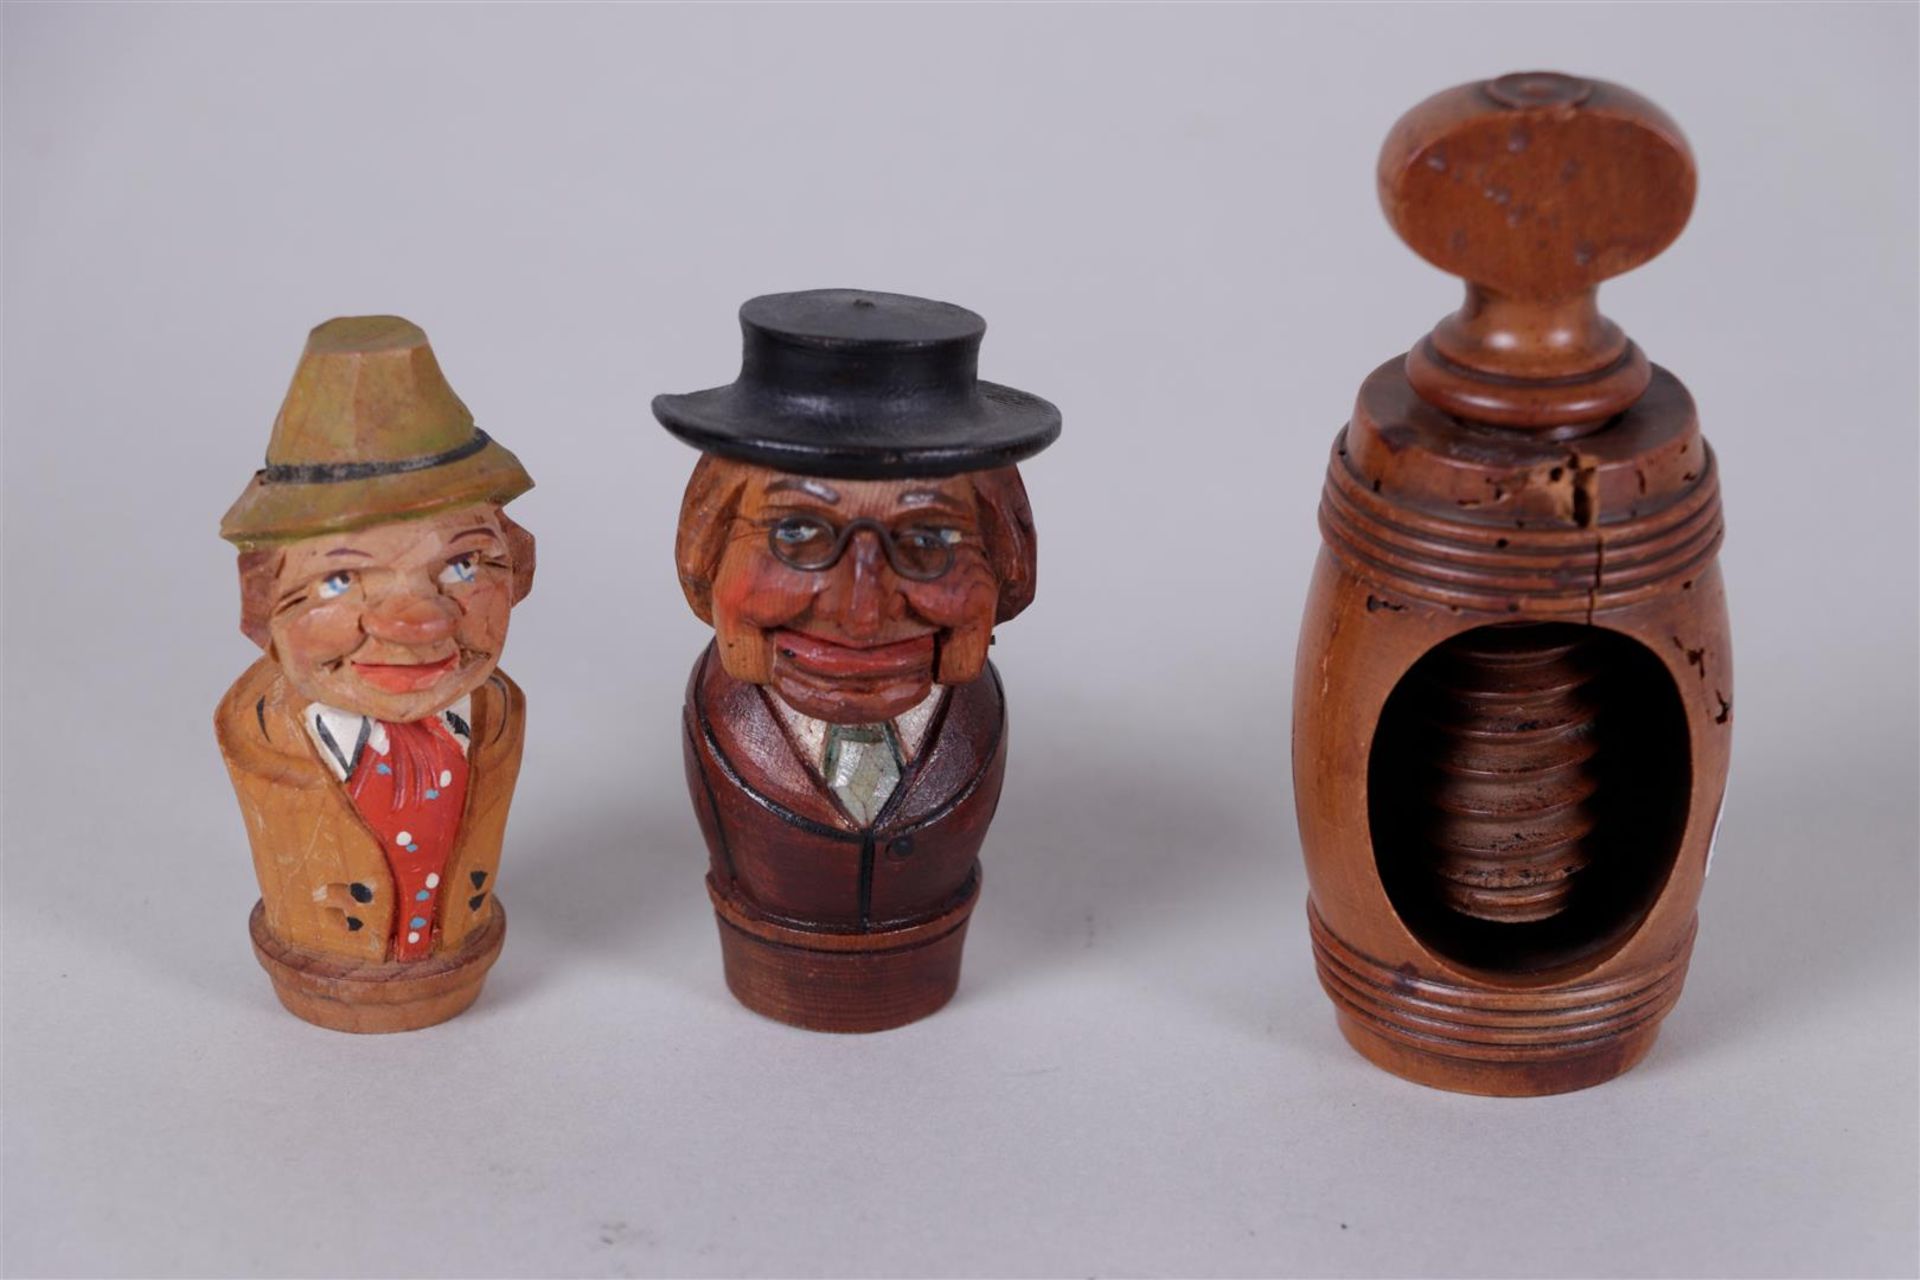 A nutcracker and two carved wooden corks.